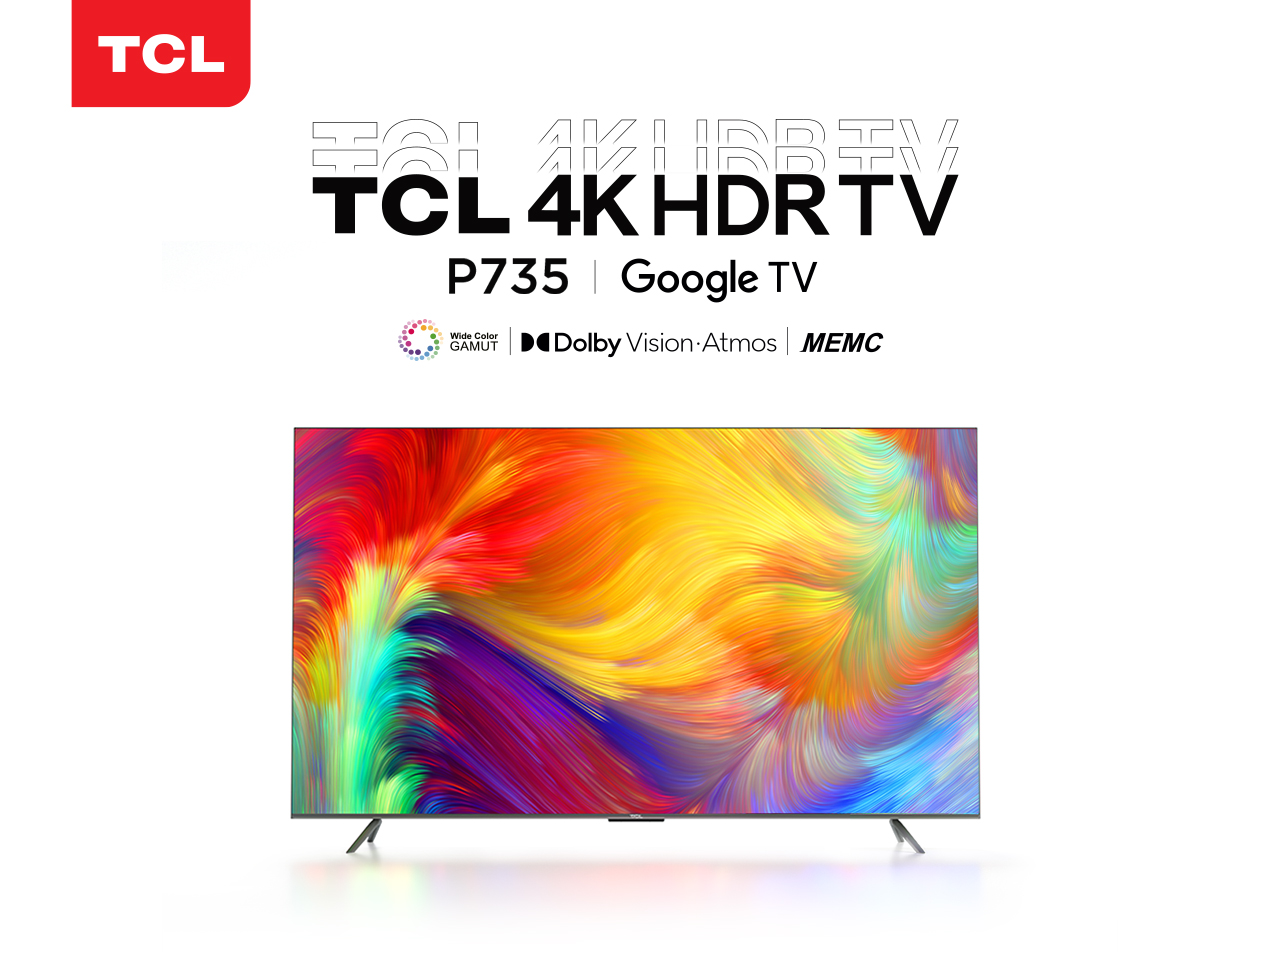 TCL Launches its latest 4K HDR TV with Dolby Vision and Wide Color GAMUT for a superior experience